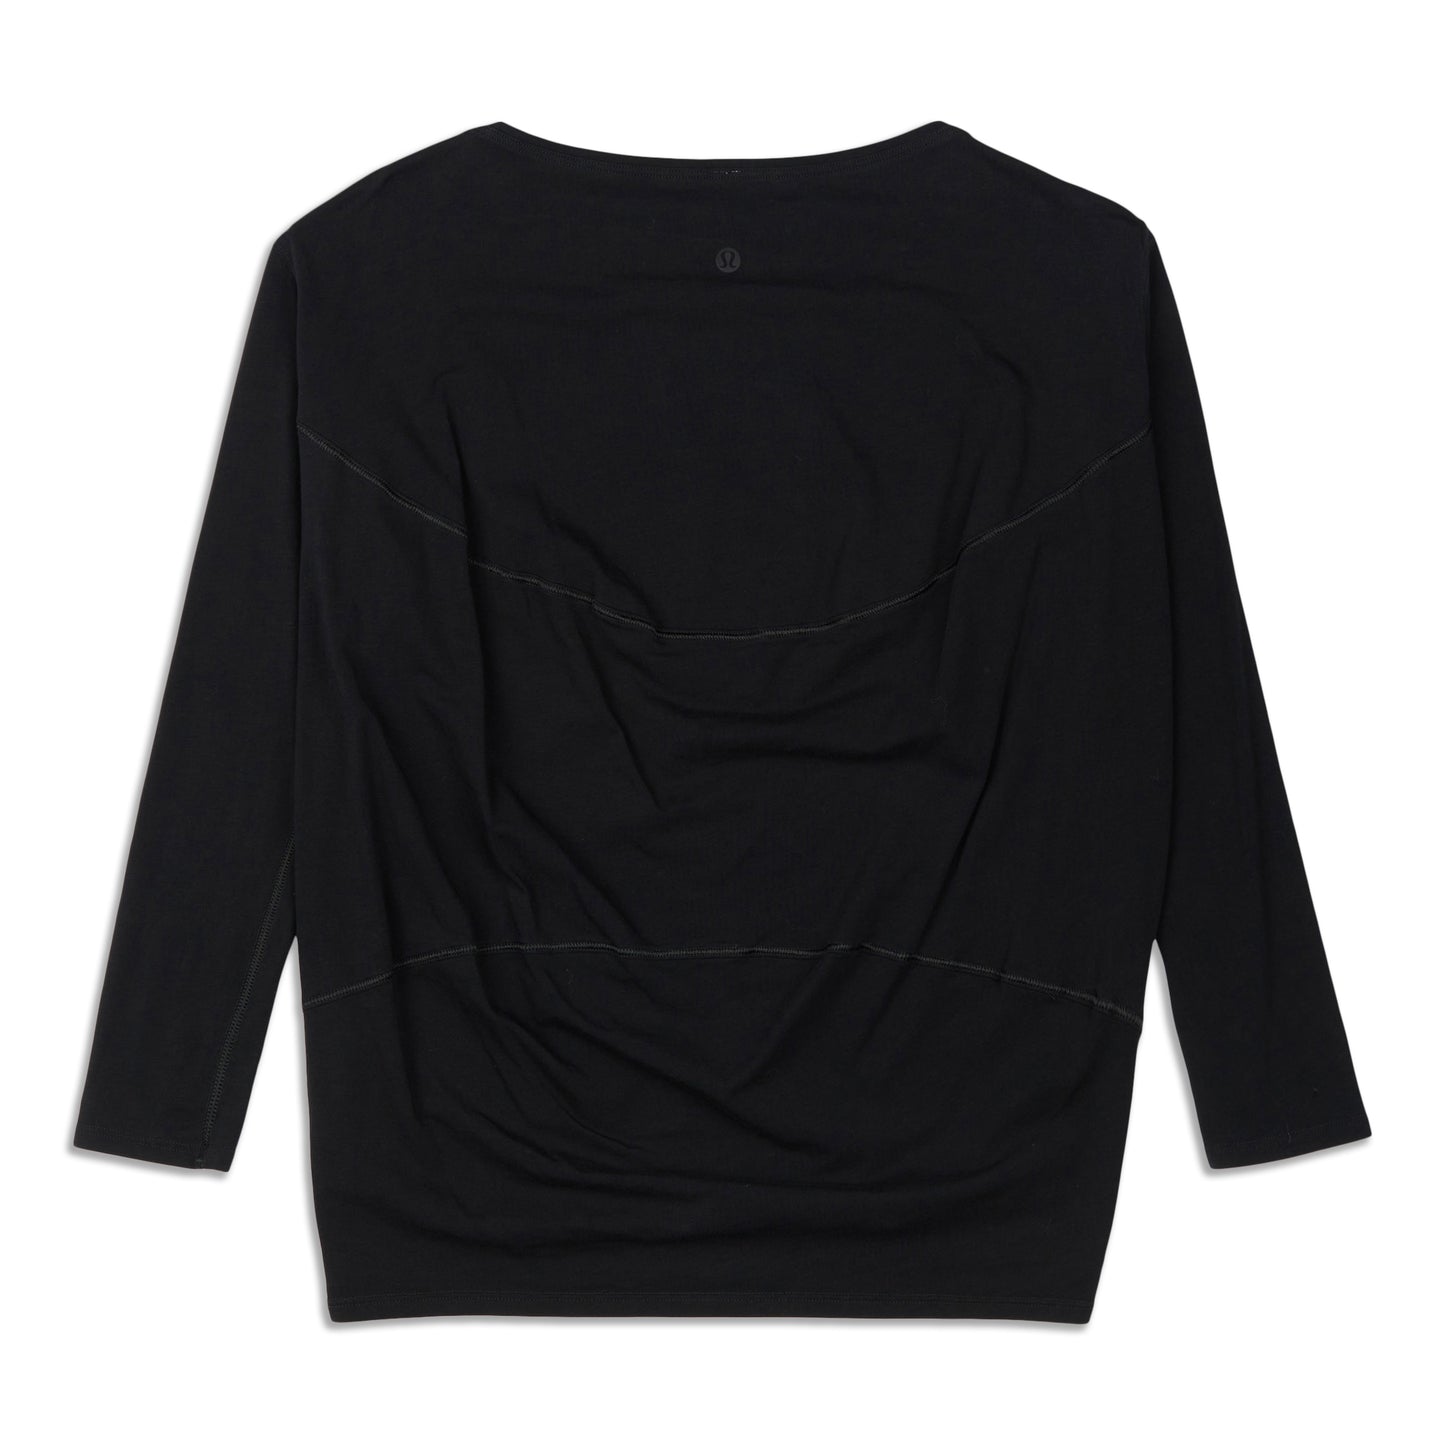 Back In Action Long-Sleeve Shirt - Resale